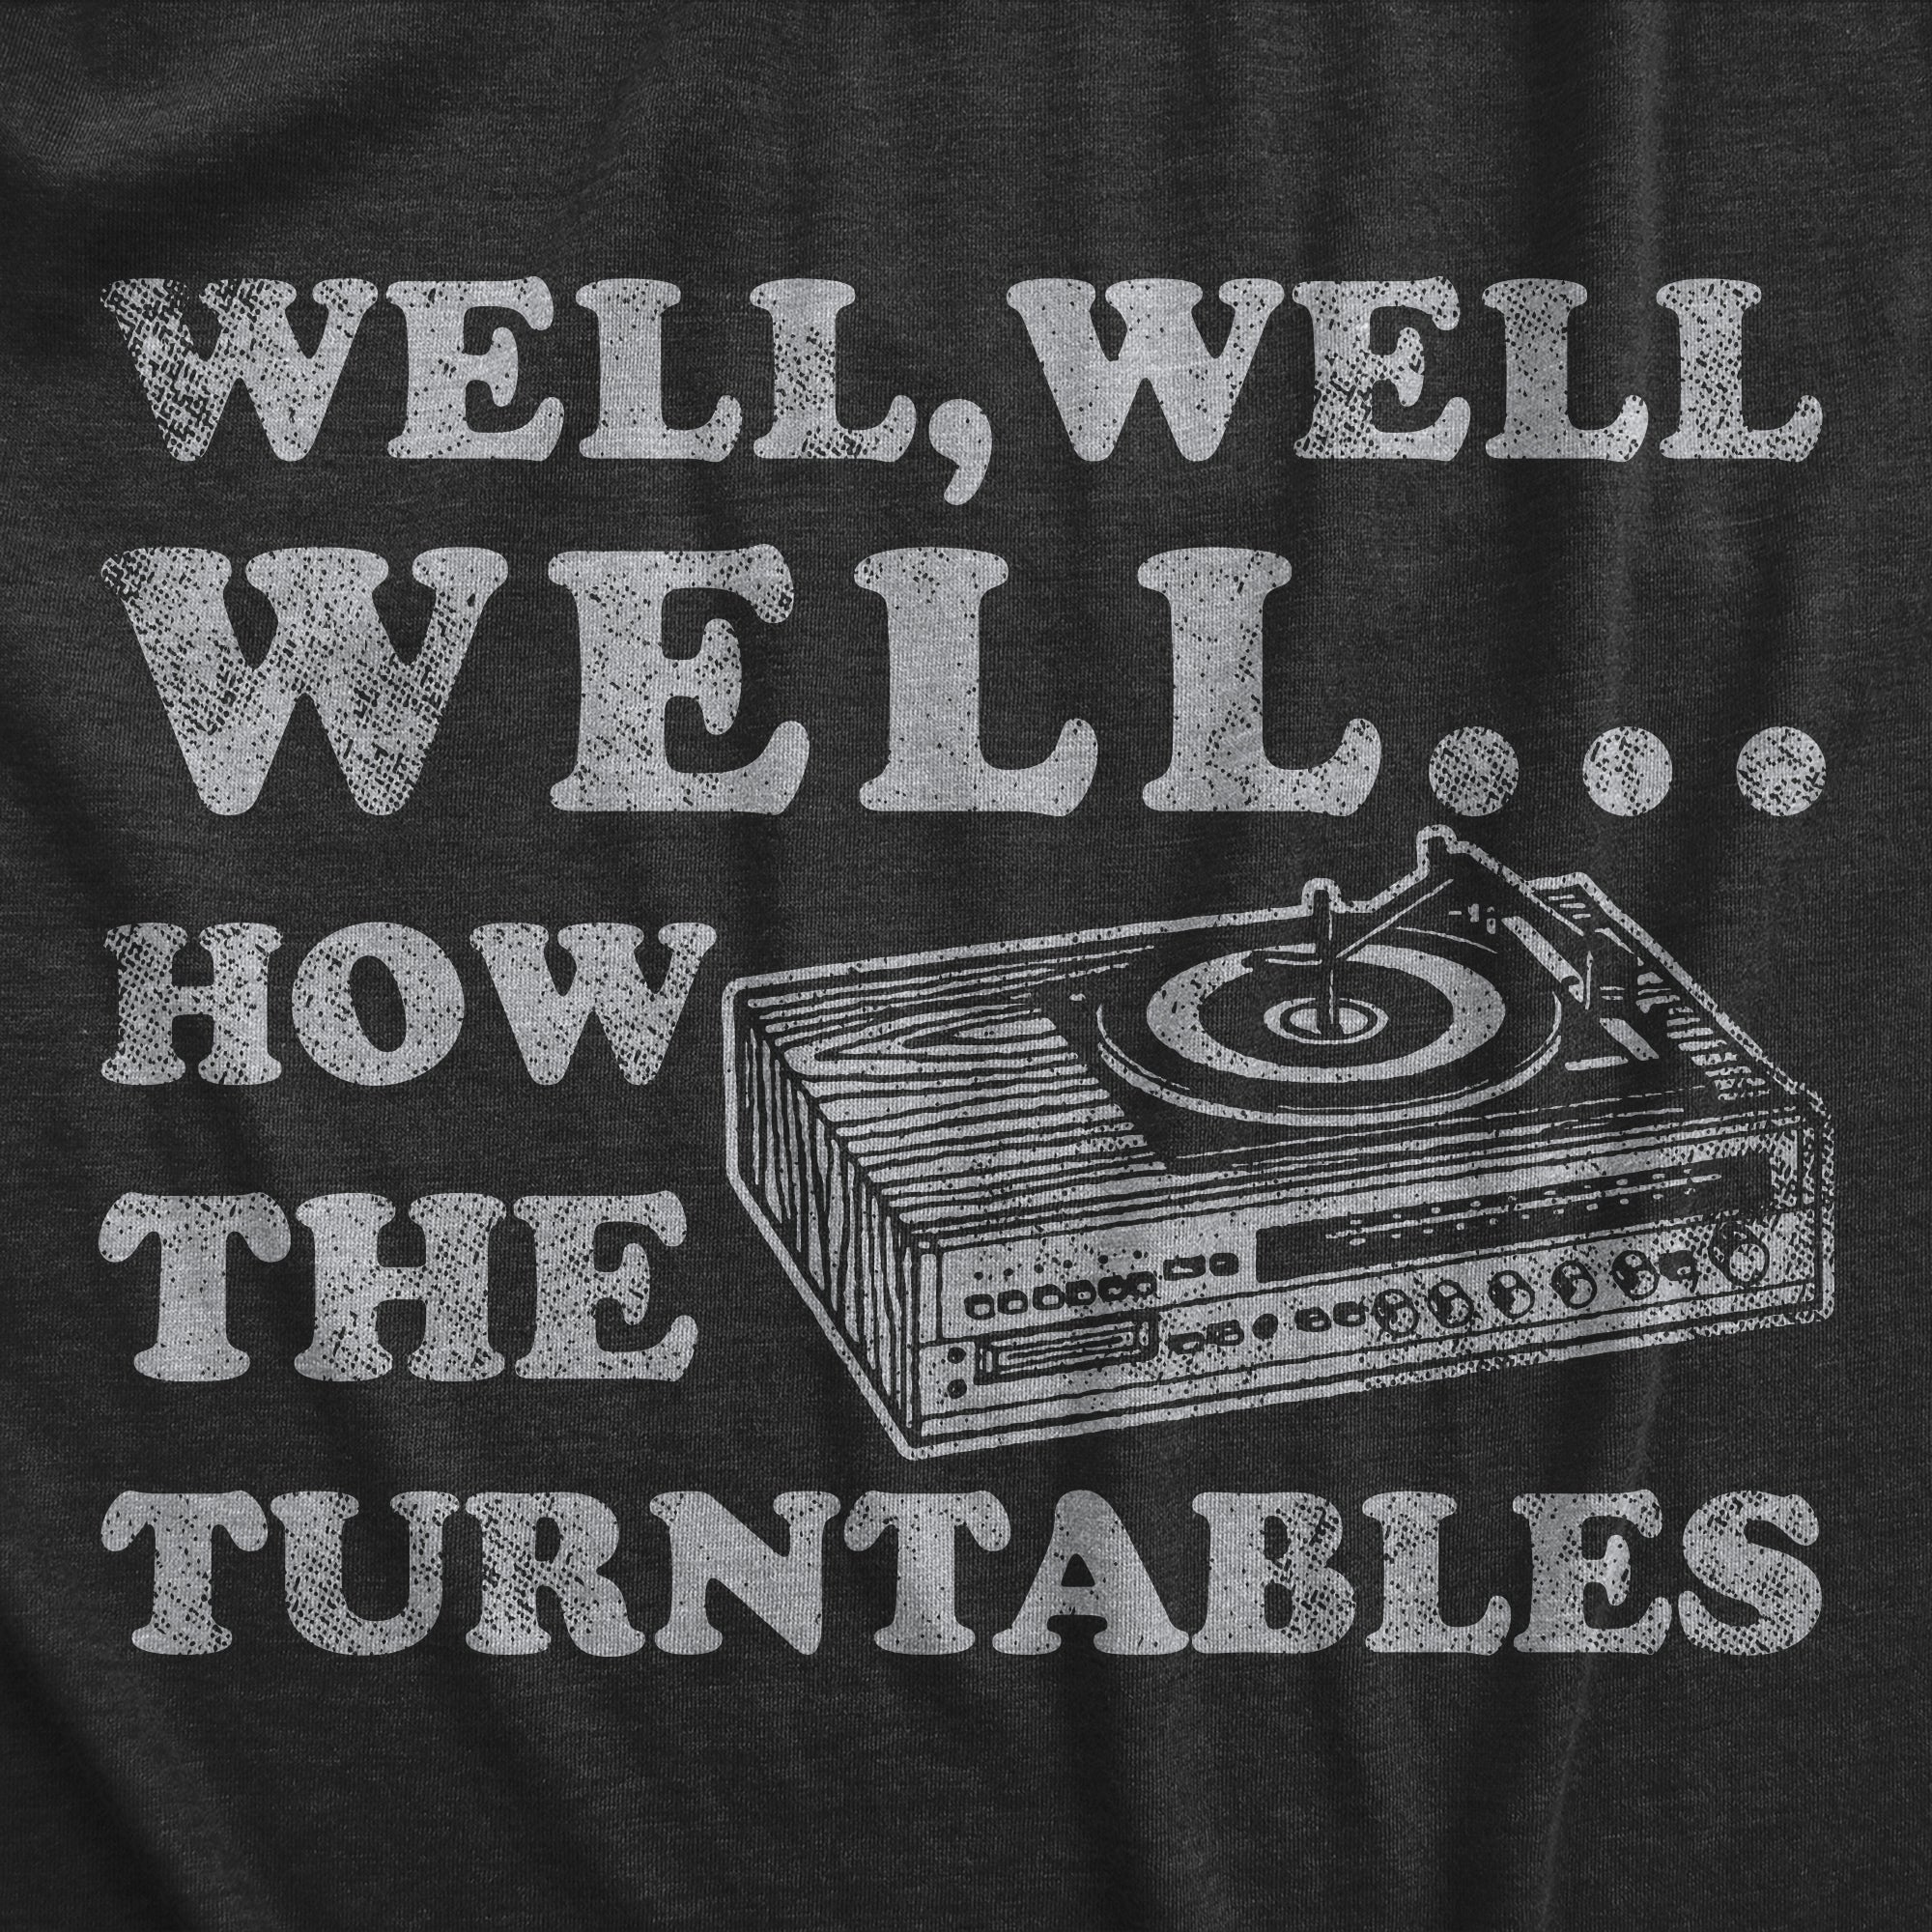 Funny Heather Black - How The Turntables Well Well Well How The Turntables Mens T Shirt Nerdy Music sarcastic Tee